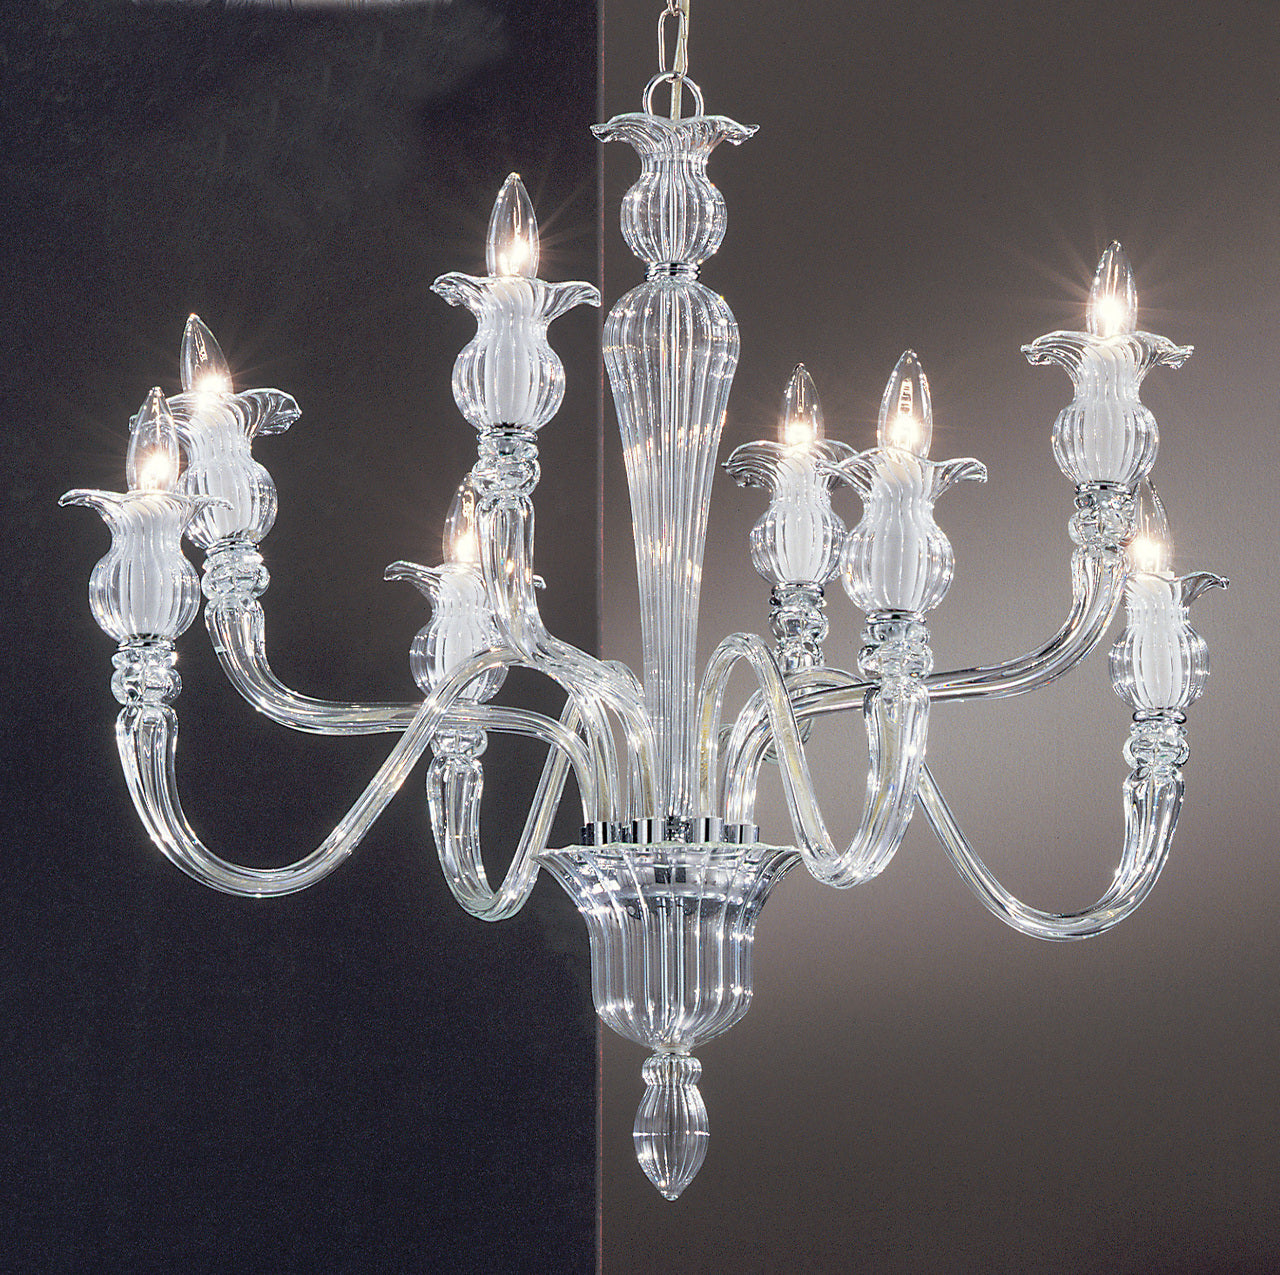 Classic Lighting 8293 CH Palermo Crystal/Glass Chandelier in Chrome (Imported from Spain)